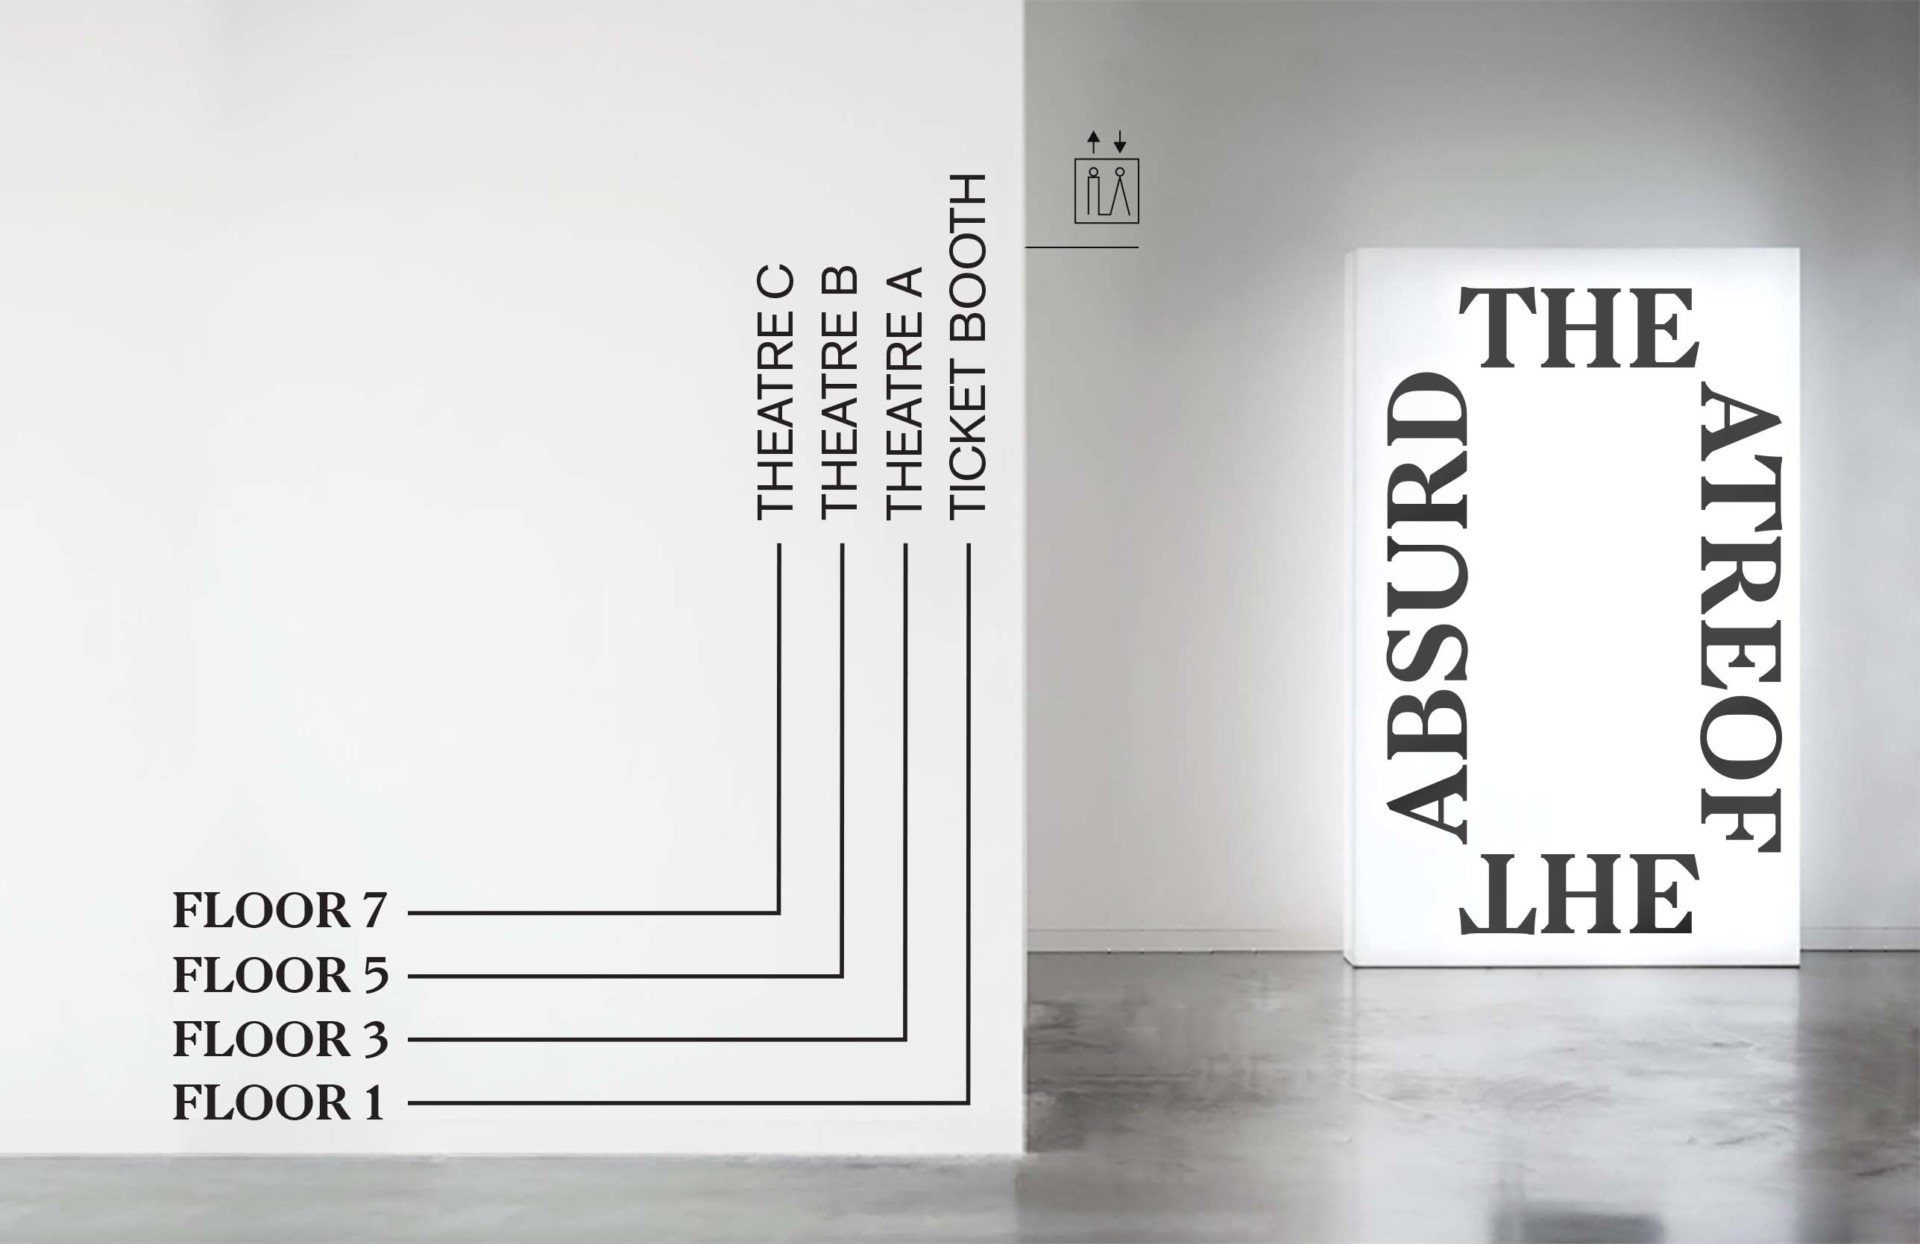 Andrew Chiou → Graphic Designer Theatre of the Absurd